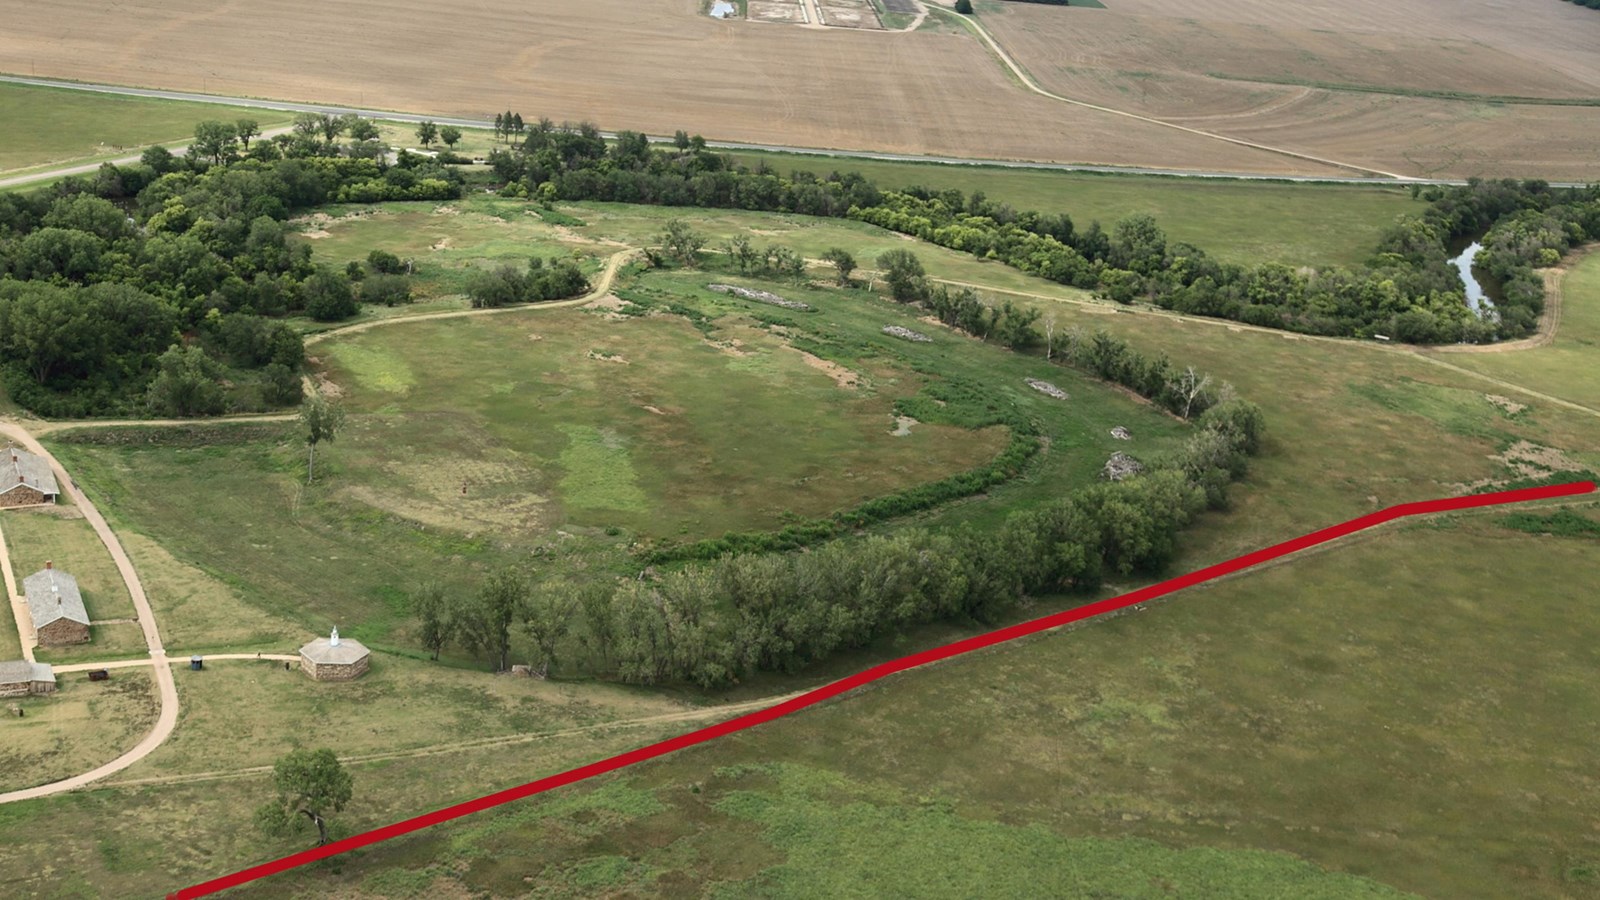 Aerial view of the oxbow with a red line indicating where the Santa Fe Trail ran by Fort Larned.